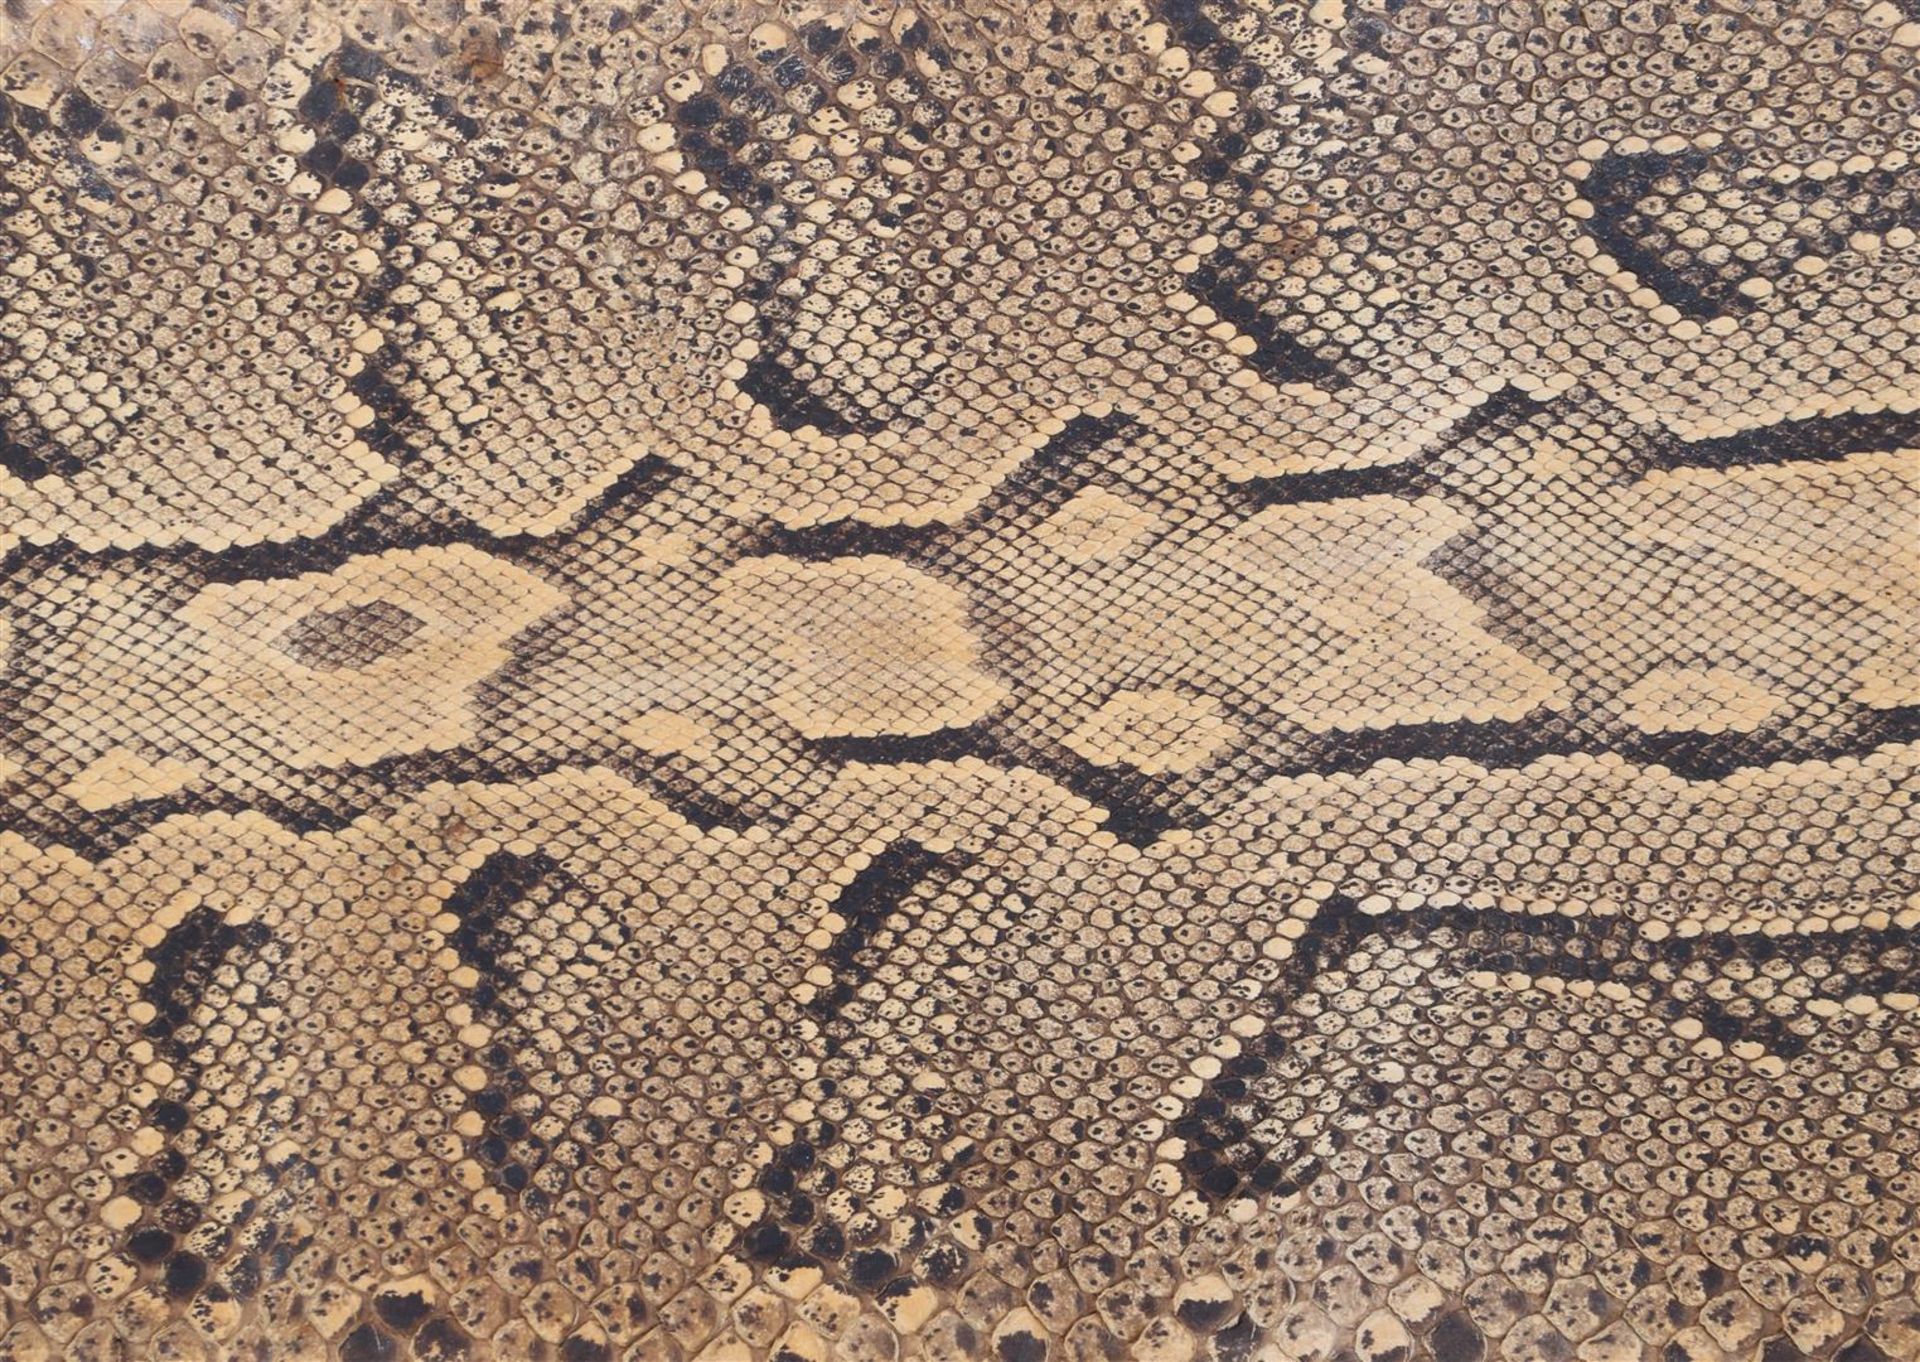 Skin of a python - Image 3 of 8